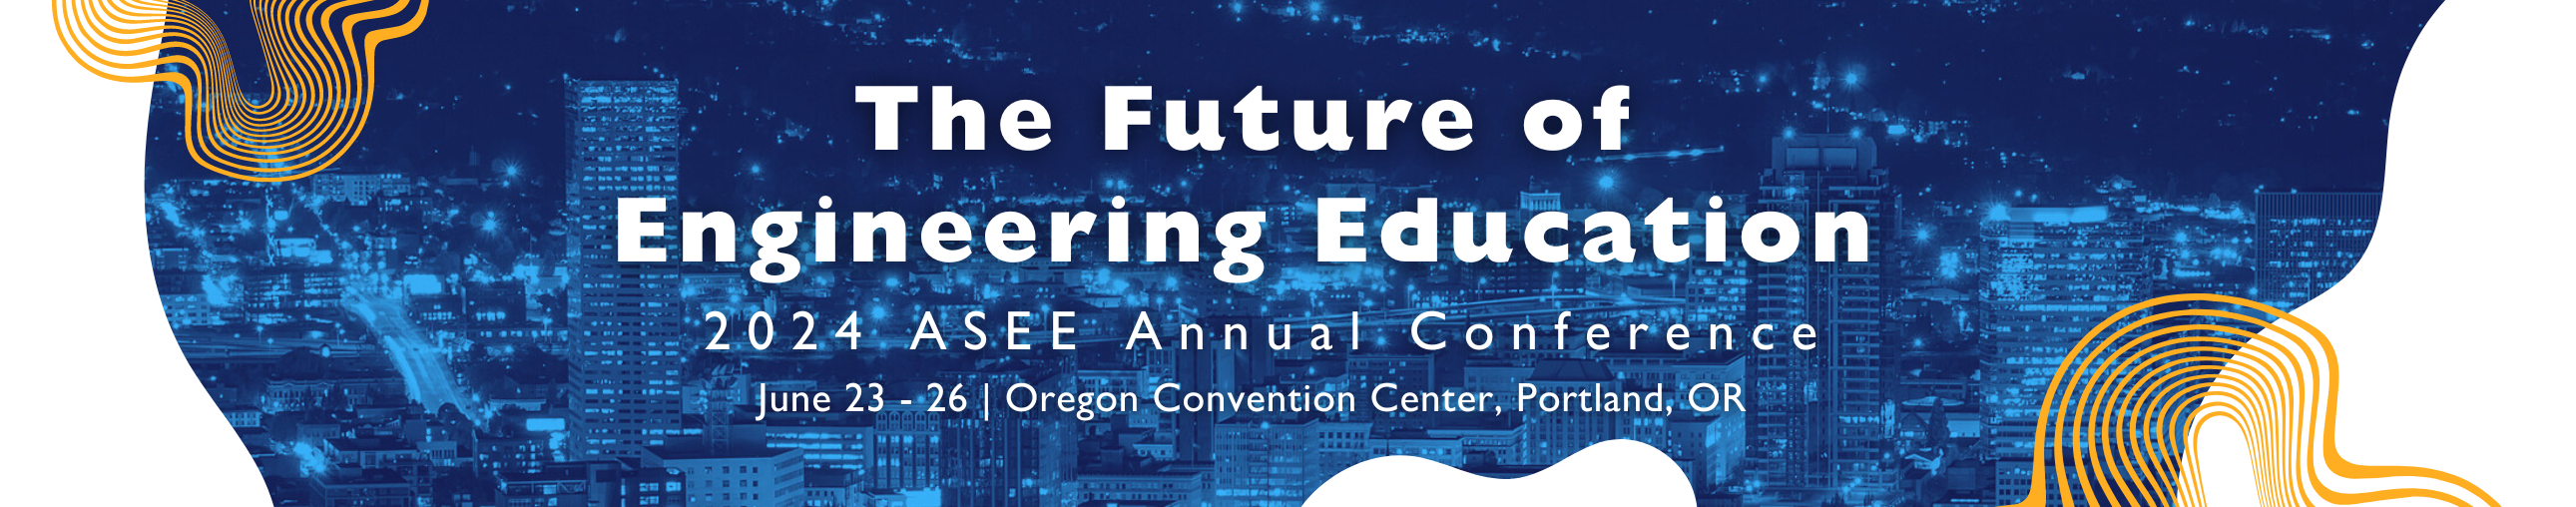 2024 ASEE Annual Conference and Exposition